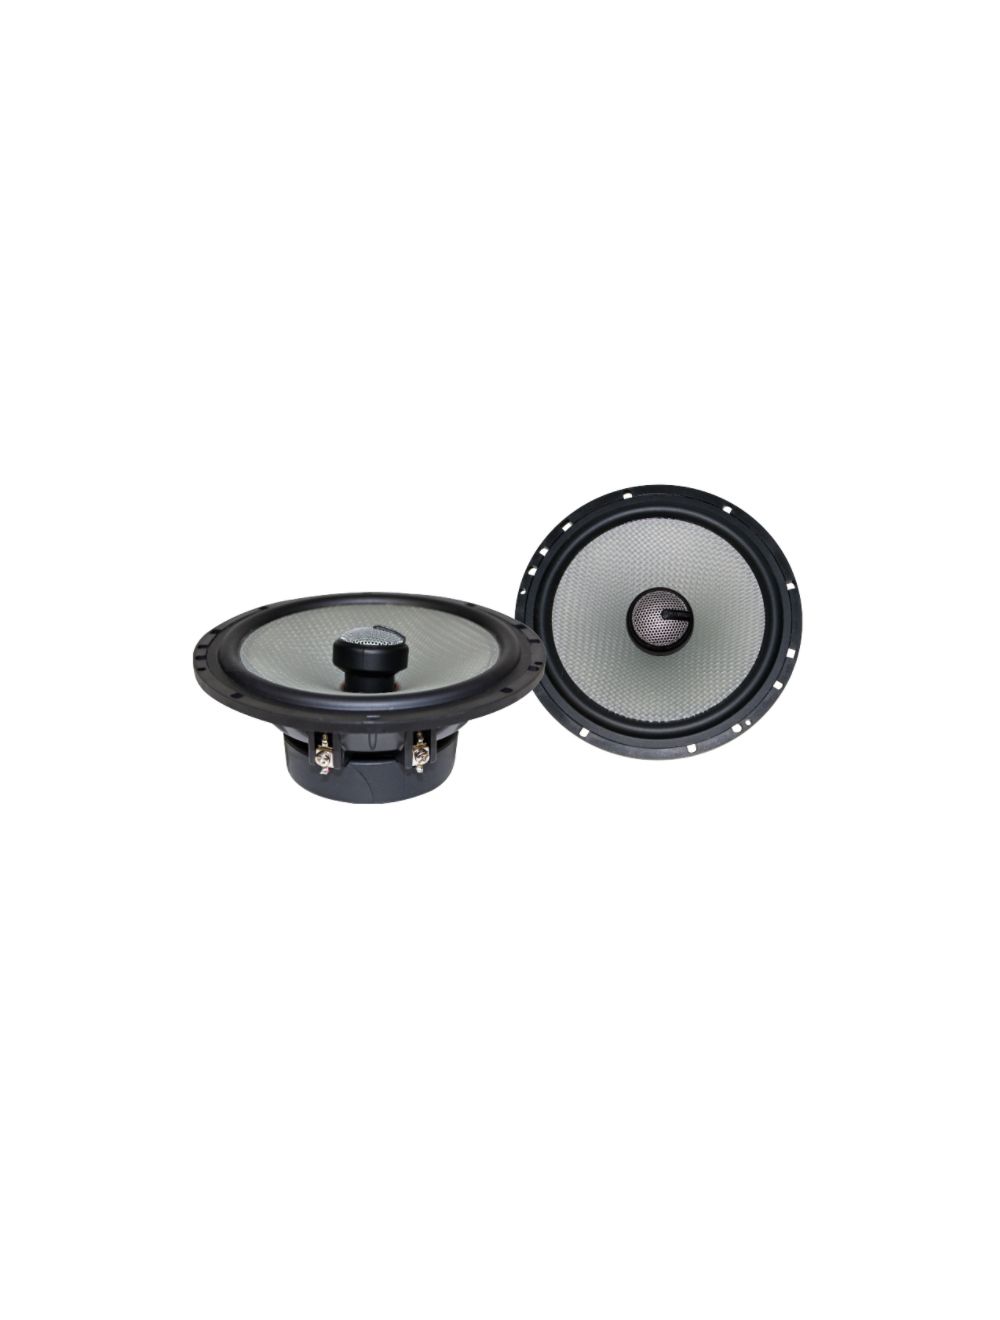 Car Speaker Size Replacement fits 2010-2017 for GMC Terrain (not amplified)